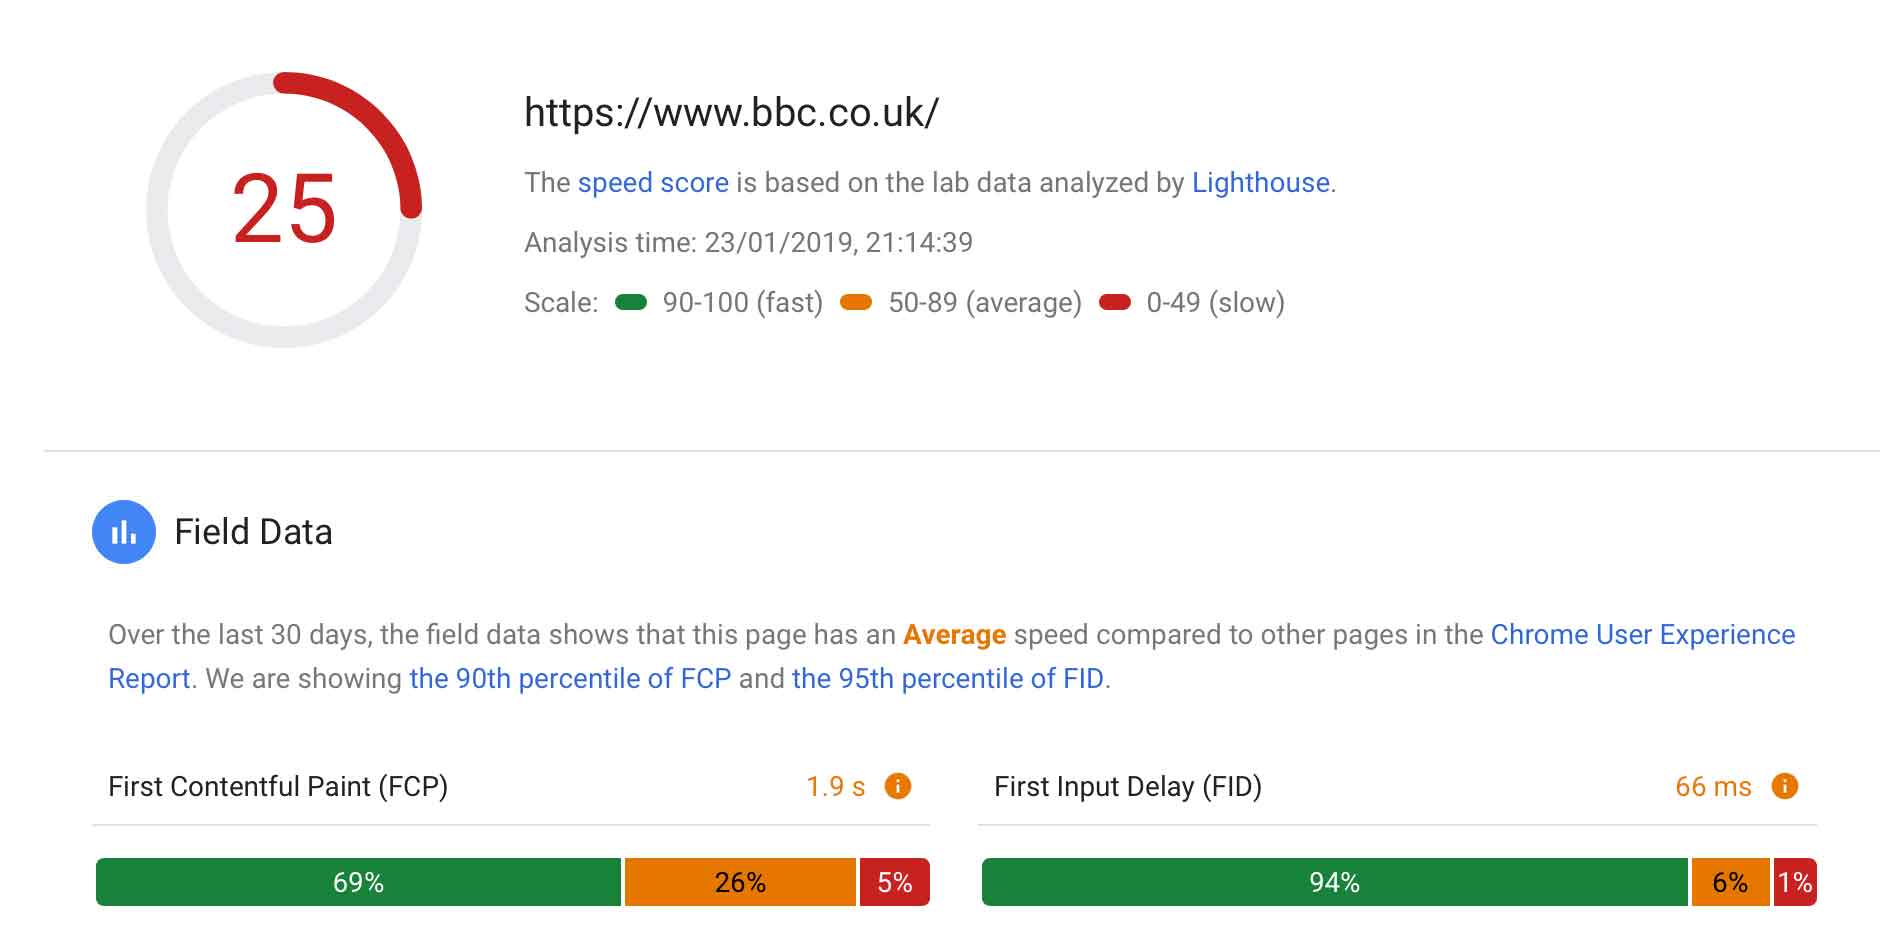 BBC's PageSpeed Score on Mobile